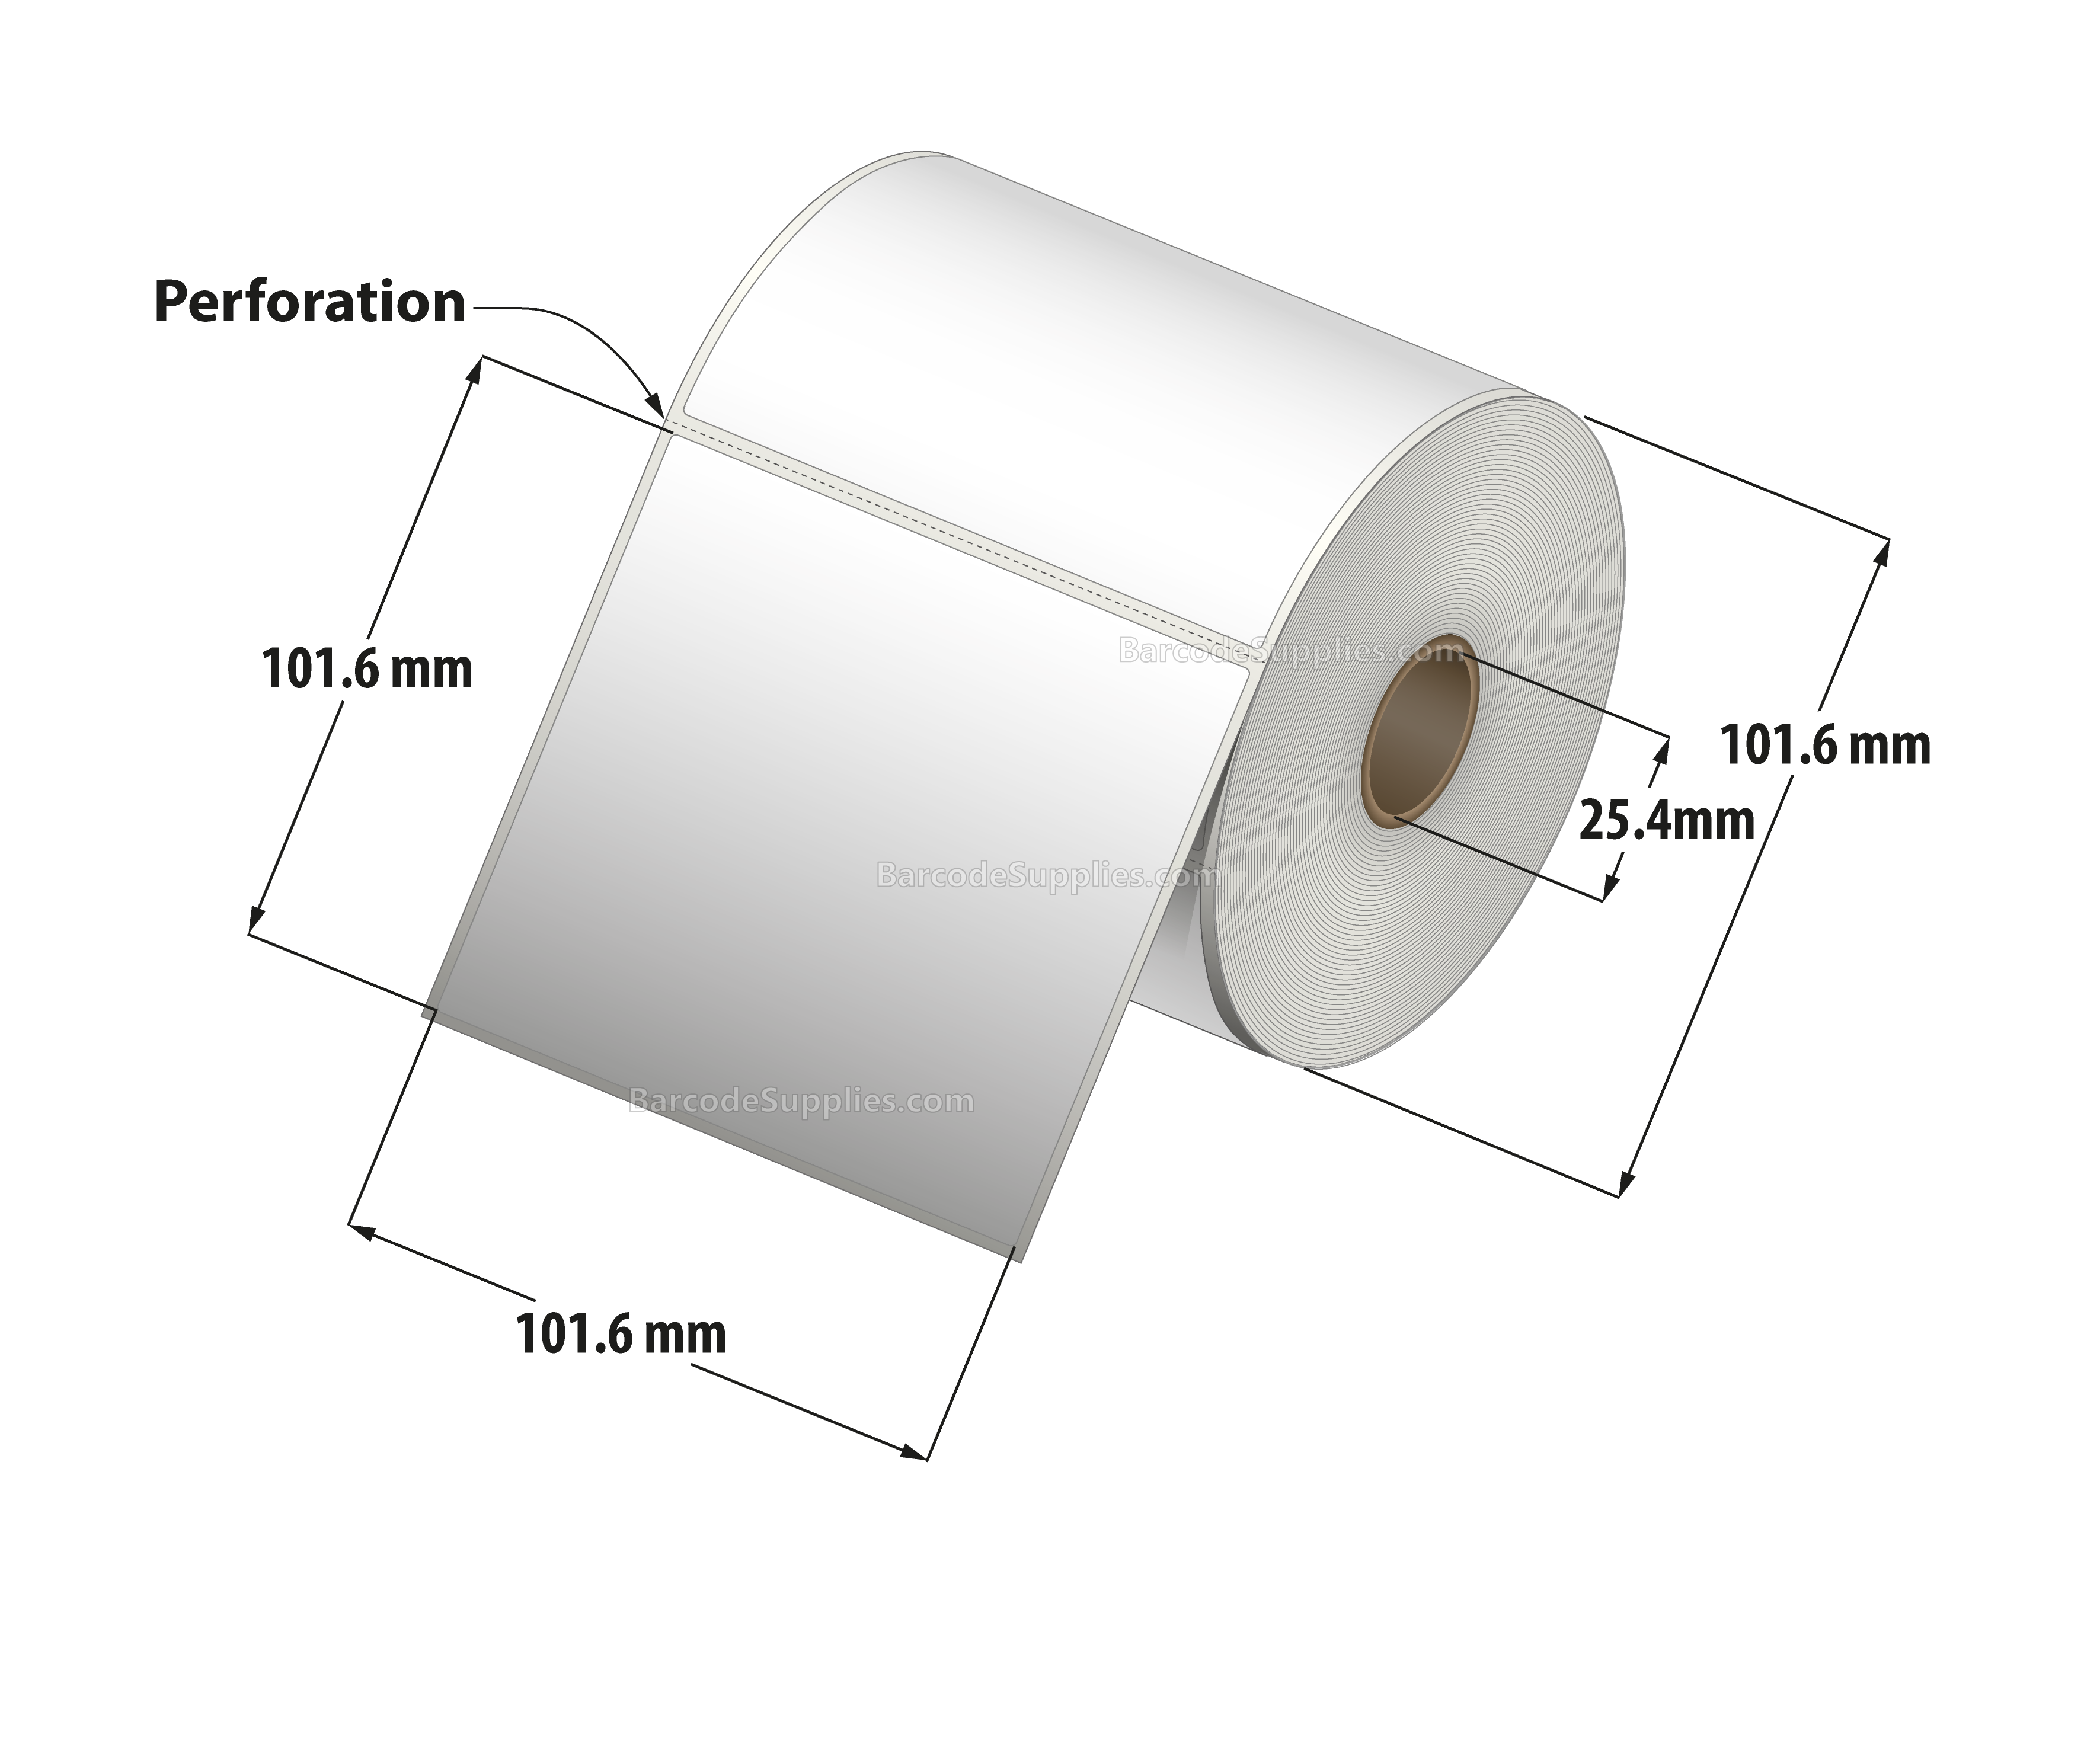 4 x 4 Direct Thermal White Labels With Acrylic Adhesive - Perforated - 380 Labels Per Roll - Carton Of 12 Rolls - 4560 Labels Total - MPN: RD-4-4-380-1 - BarcodeSource, Inc.